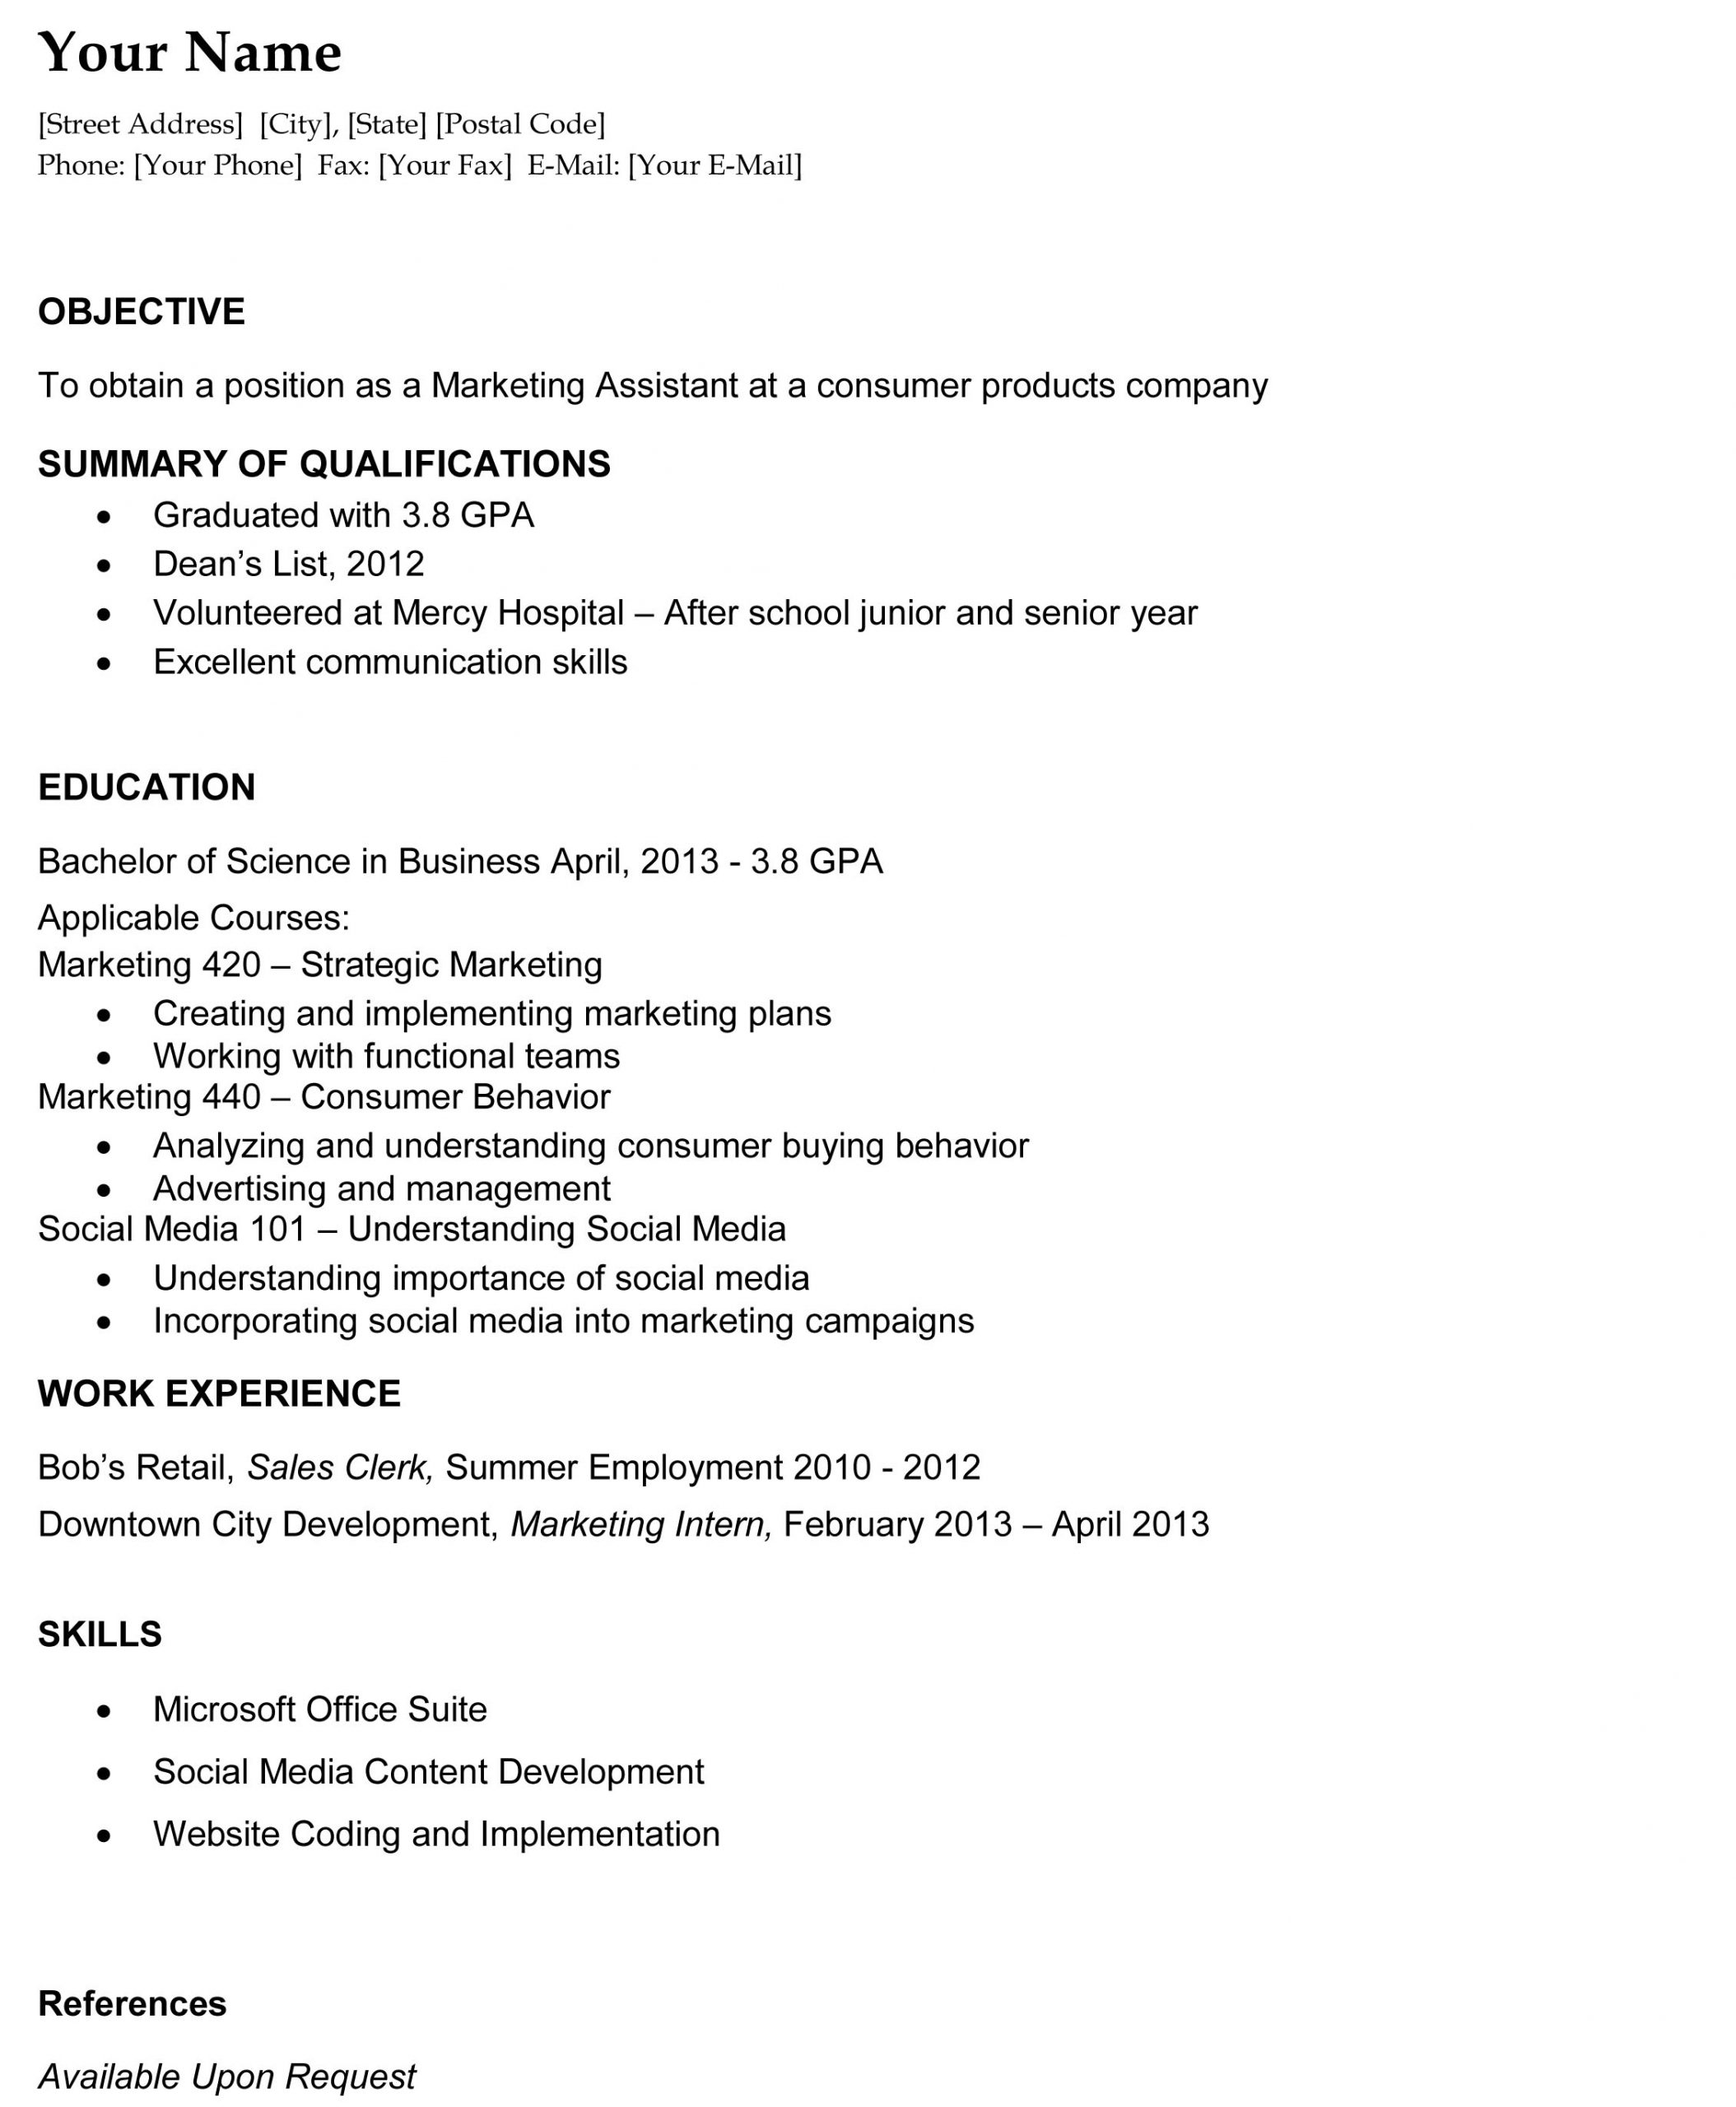 Resume Template For College Graduate Akali inside sizing 2260 X 2743